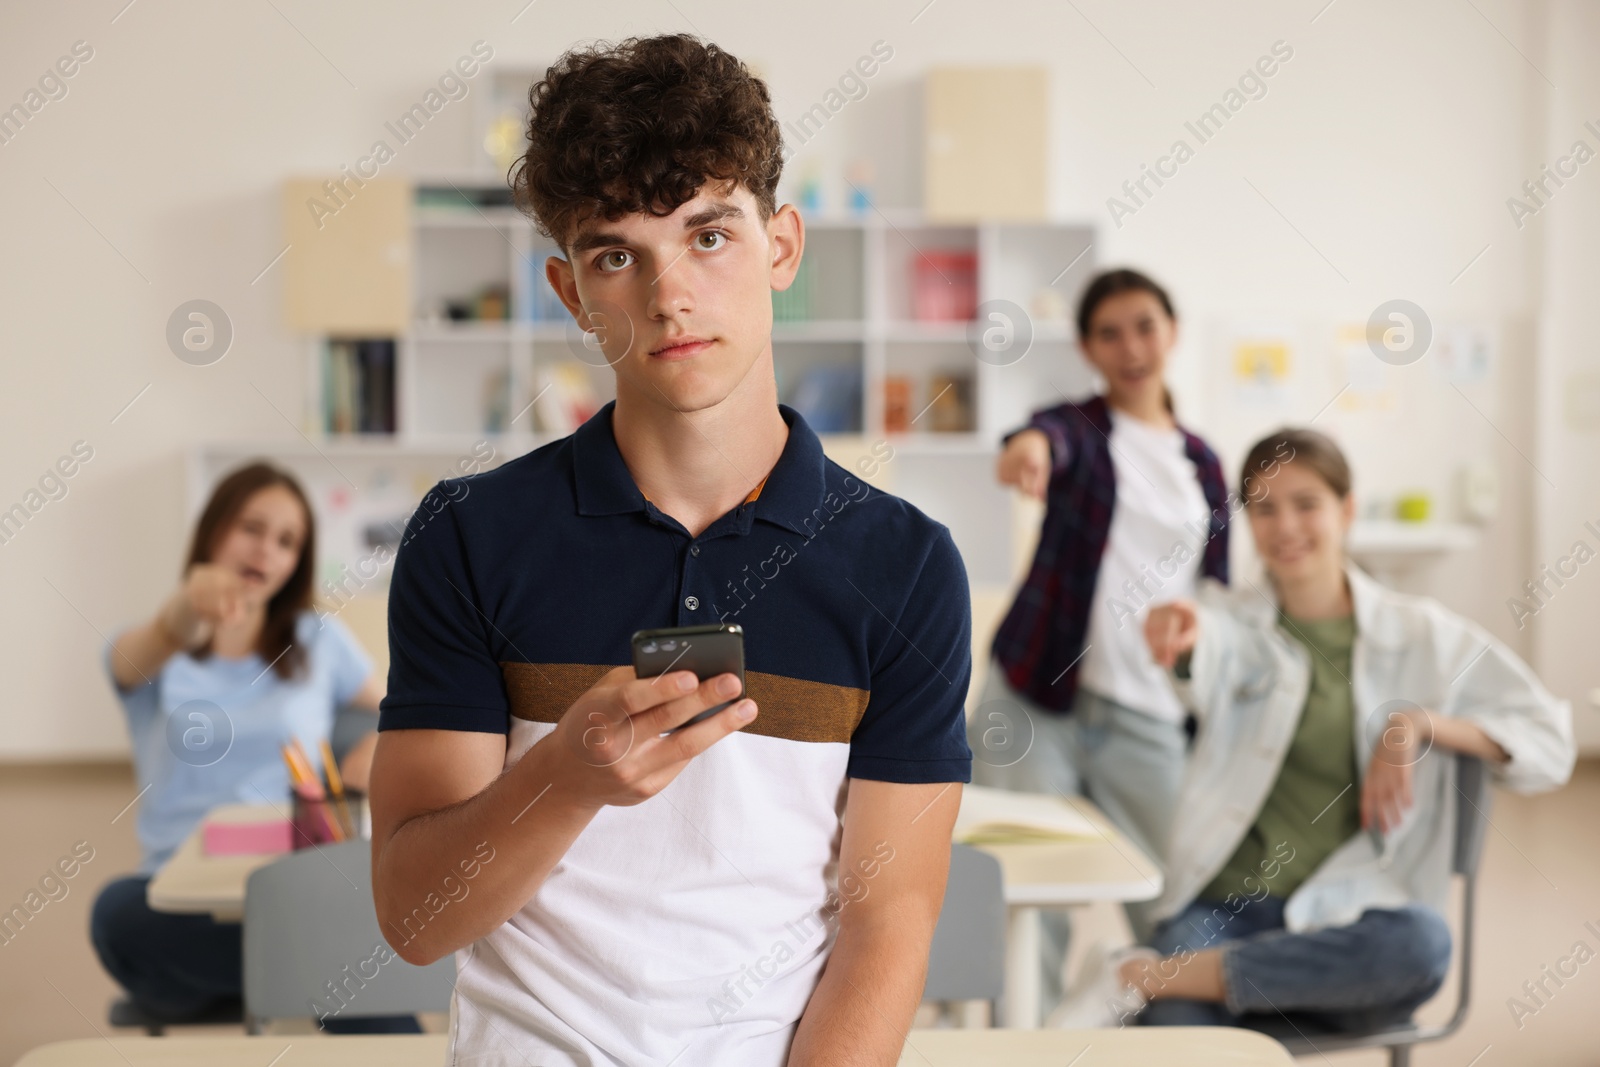 Photo of Teen problems. Lonely boy with smartphone standing separately from other students in classroom